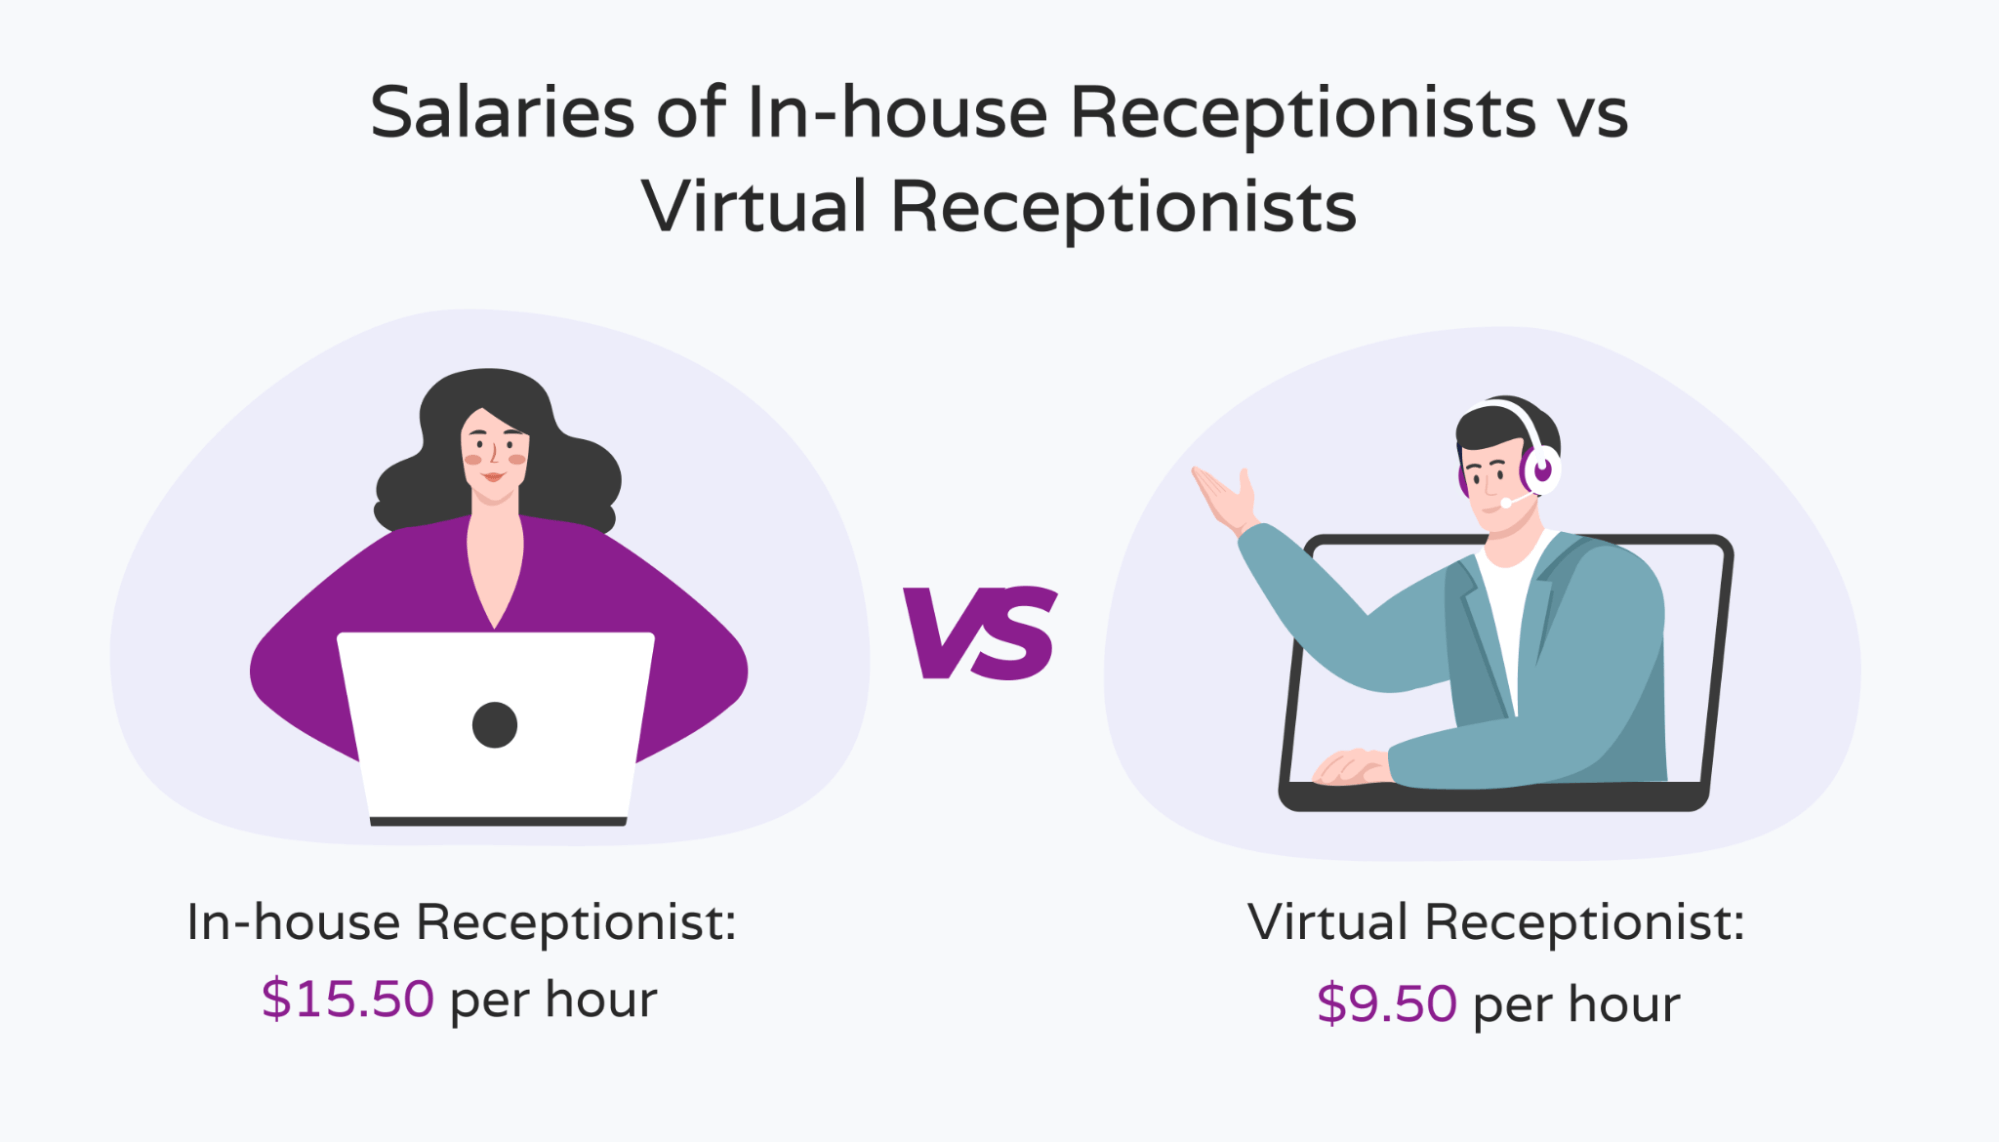 Image showing the salaries of in-house and virtual receptionists